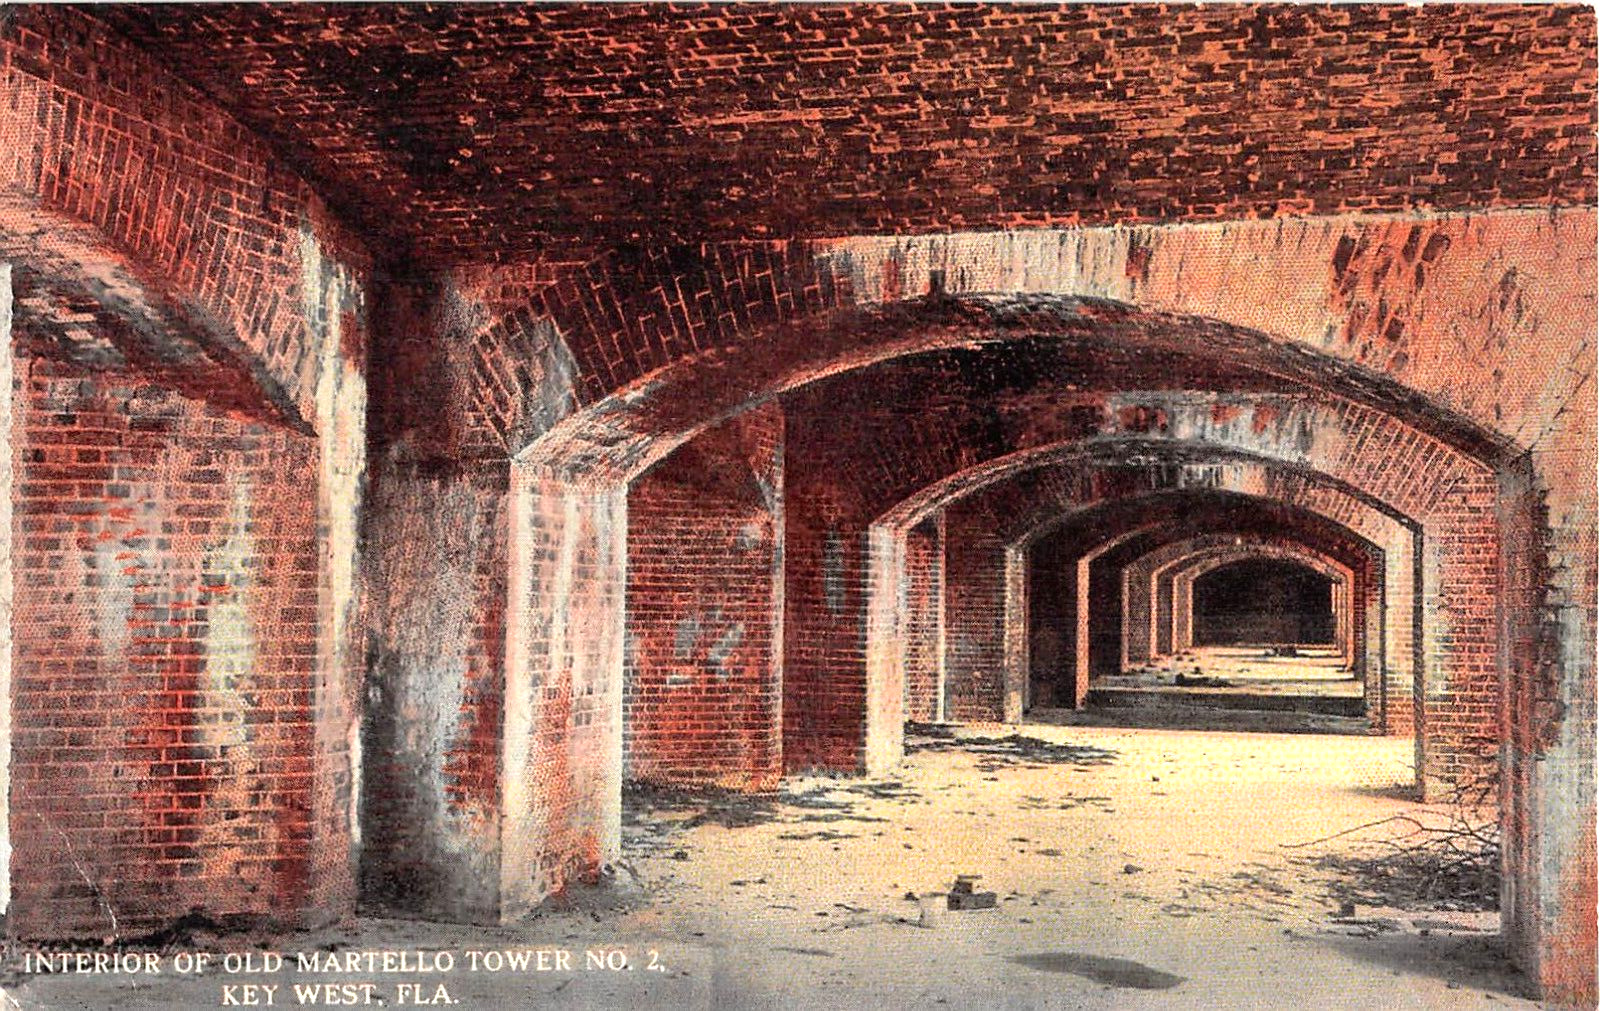 1913 Interior of Old Martello Tower #2 Key West FL post card